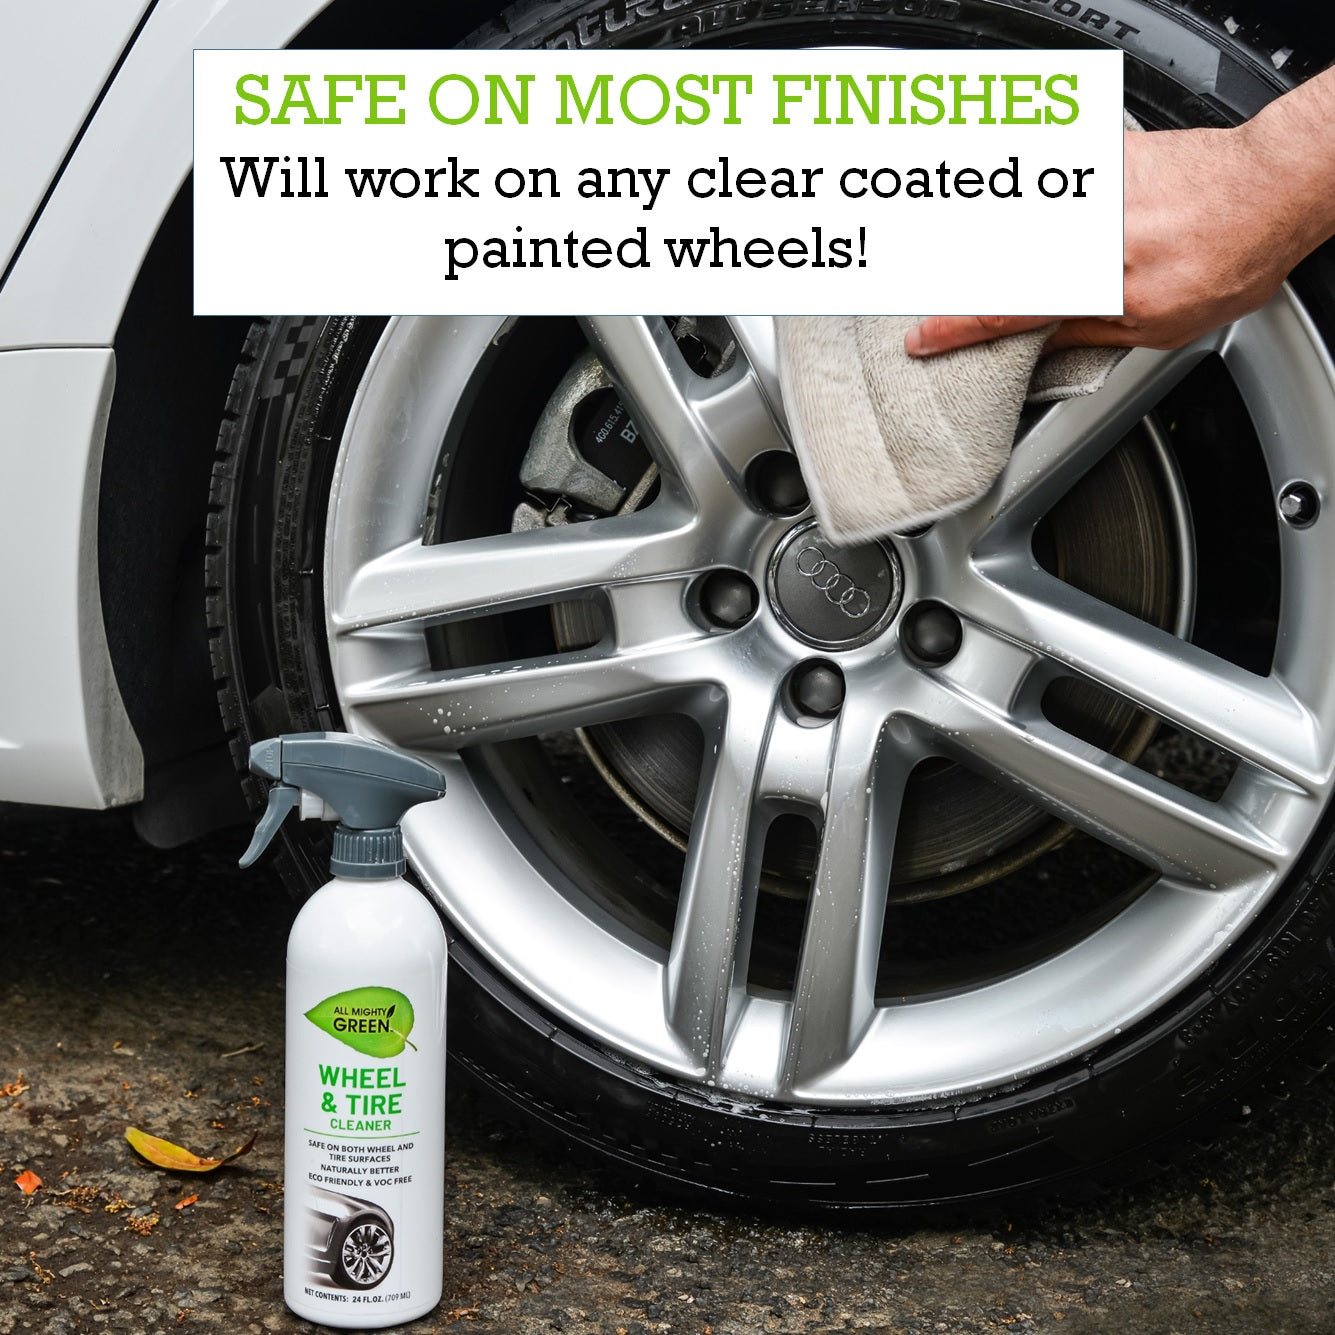 All Mighty Green Wheel & Tire Cleaner | 24 oz. Spray